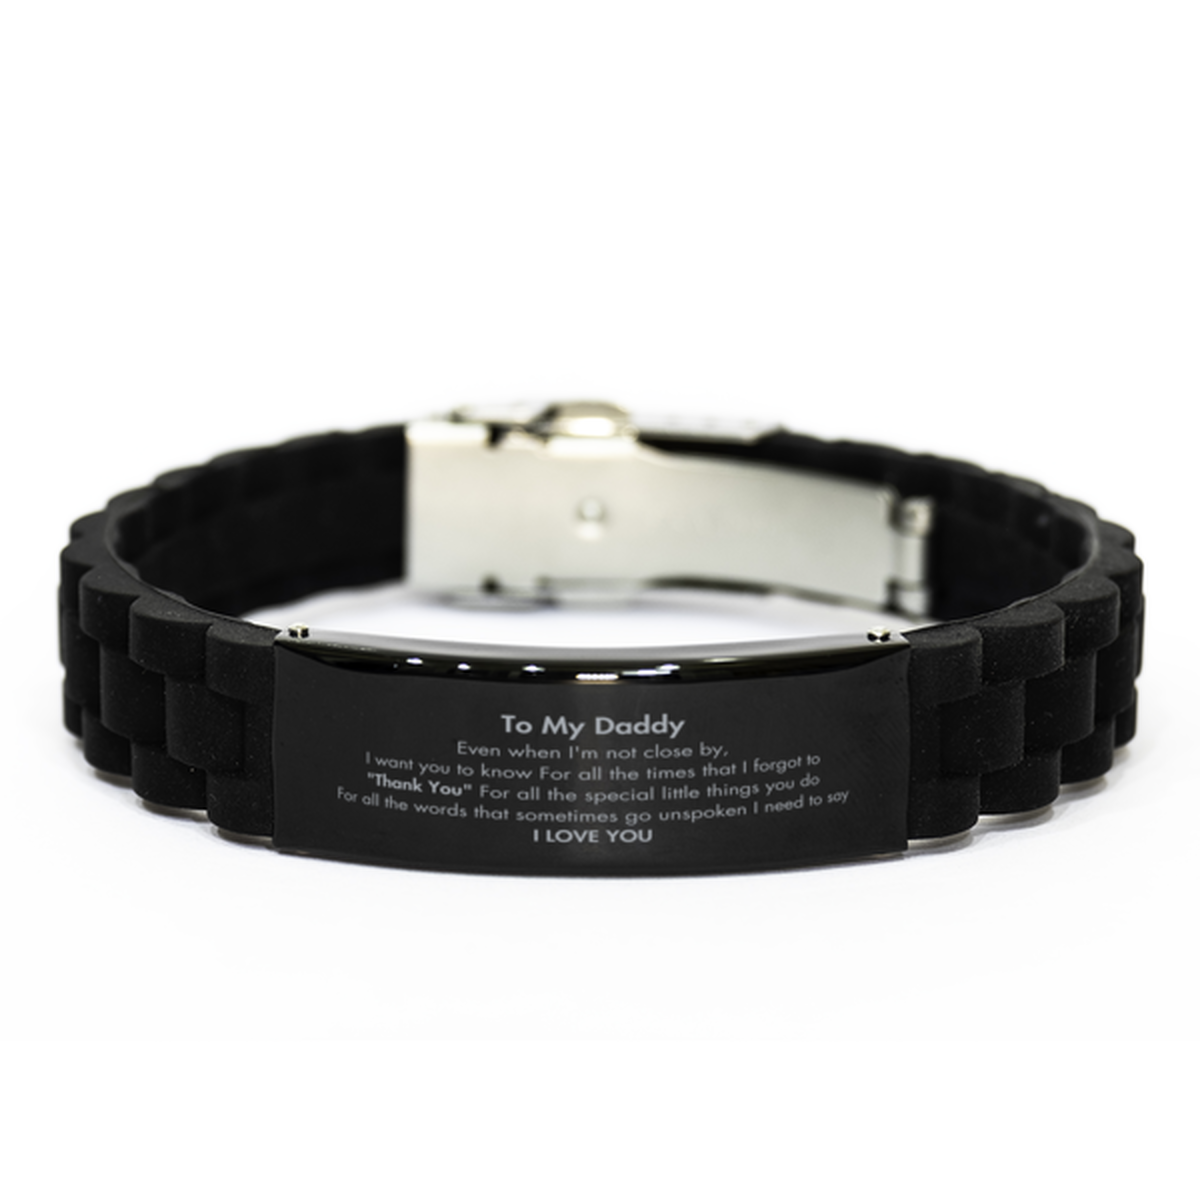 Thank You Gifts for Daddy, Keepsake Black Glidelock Clasp Bracelet Gifts for Daddy Birthday Mother's day Father's Day Daddy For all the words That sometimes go unspoken I need to say I LOVE YOU